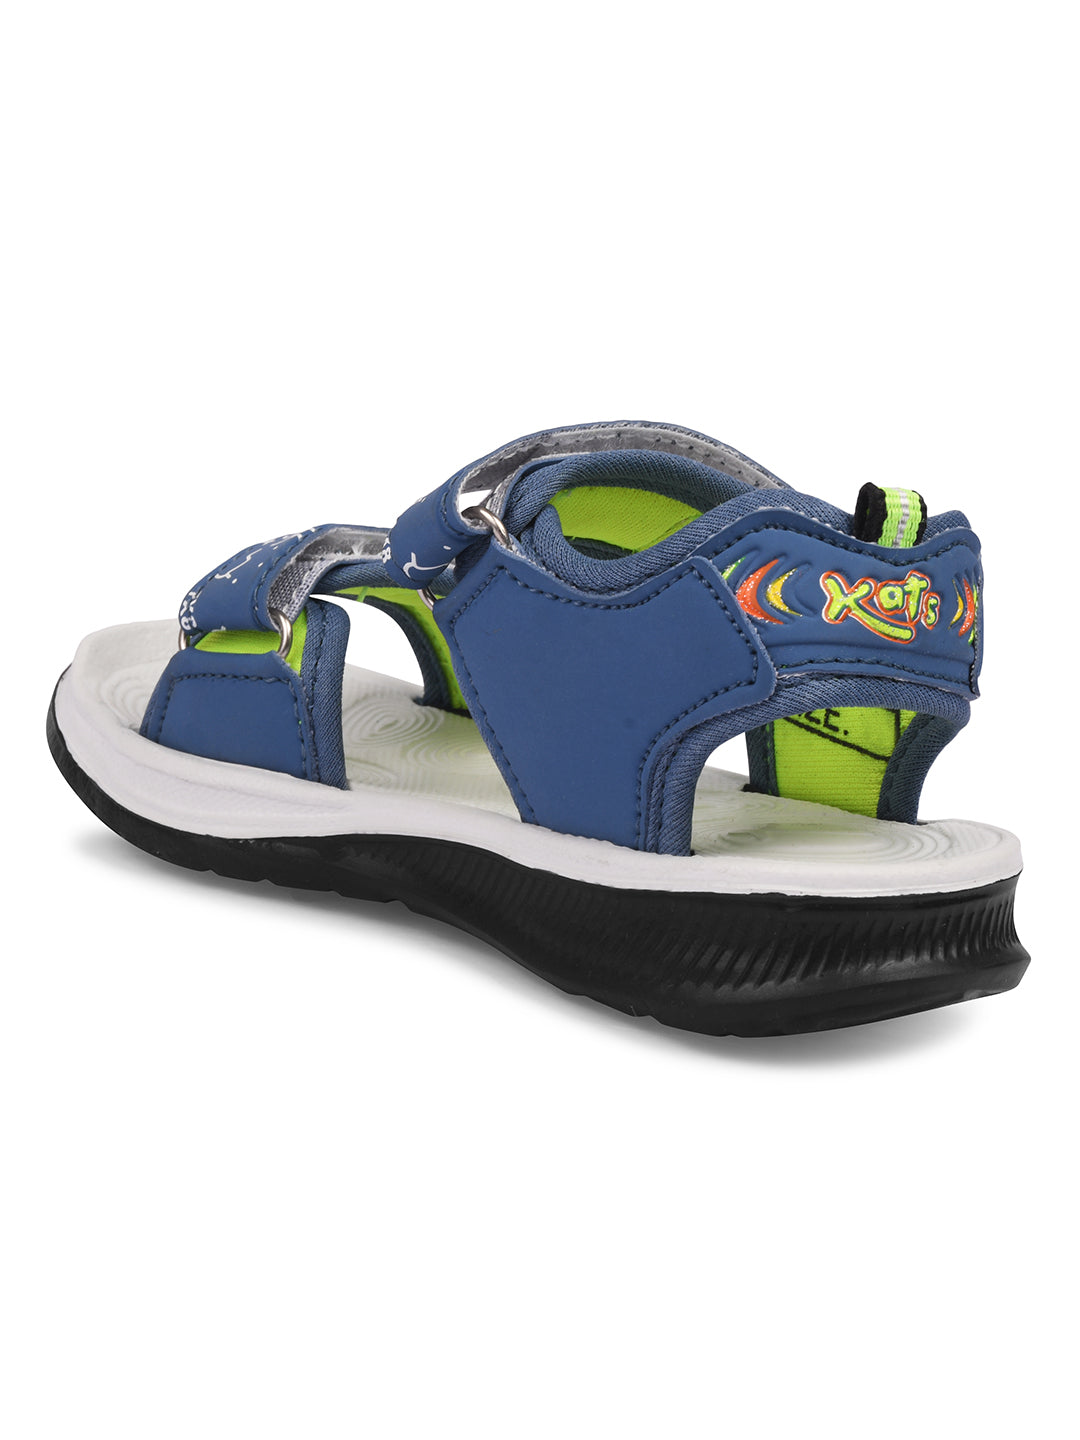 Kats FLAG Kids Boys and Girls Printed Sandals (2 to 5 Years)